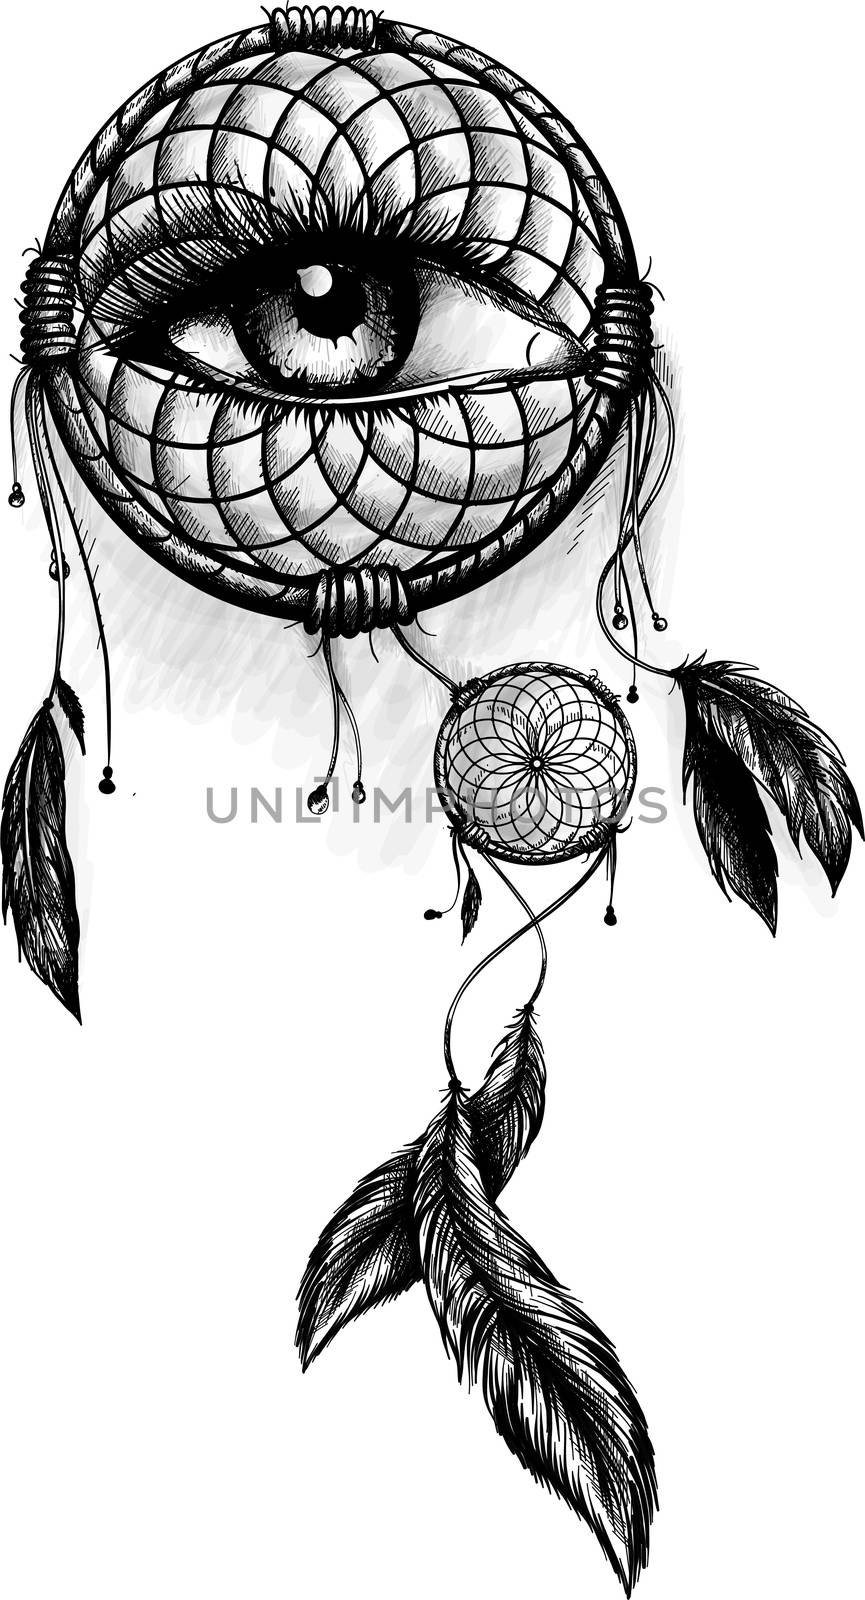 Fashion illustration with dream catcher and flowers. Hand drawn design by dean